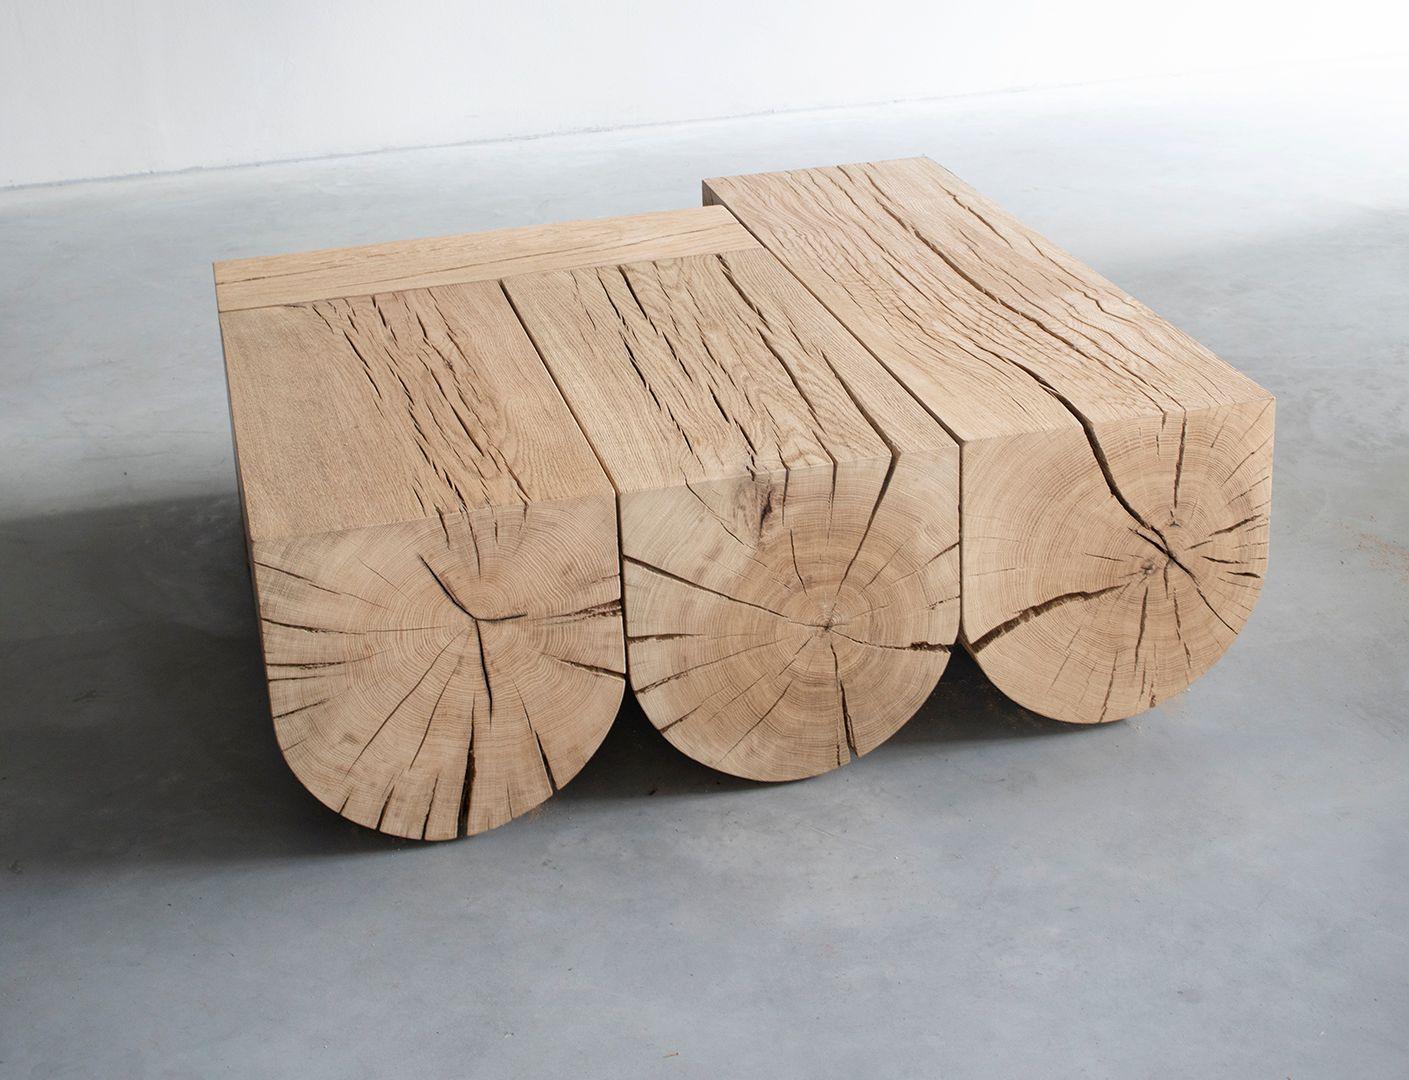 Adjacencies square coffee table by Van Rossum
Dimensions: D108 x W108 x H37 cm
Materials: Oak, steel.

The Adjacencies collection is delivered in natural French oak finish, unless otherwise requested. The steel is available in four colors or in